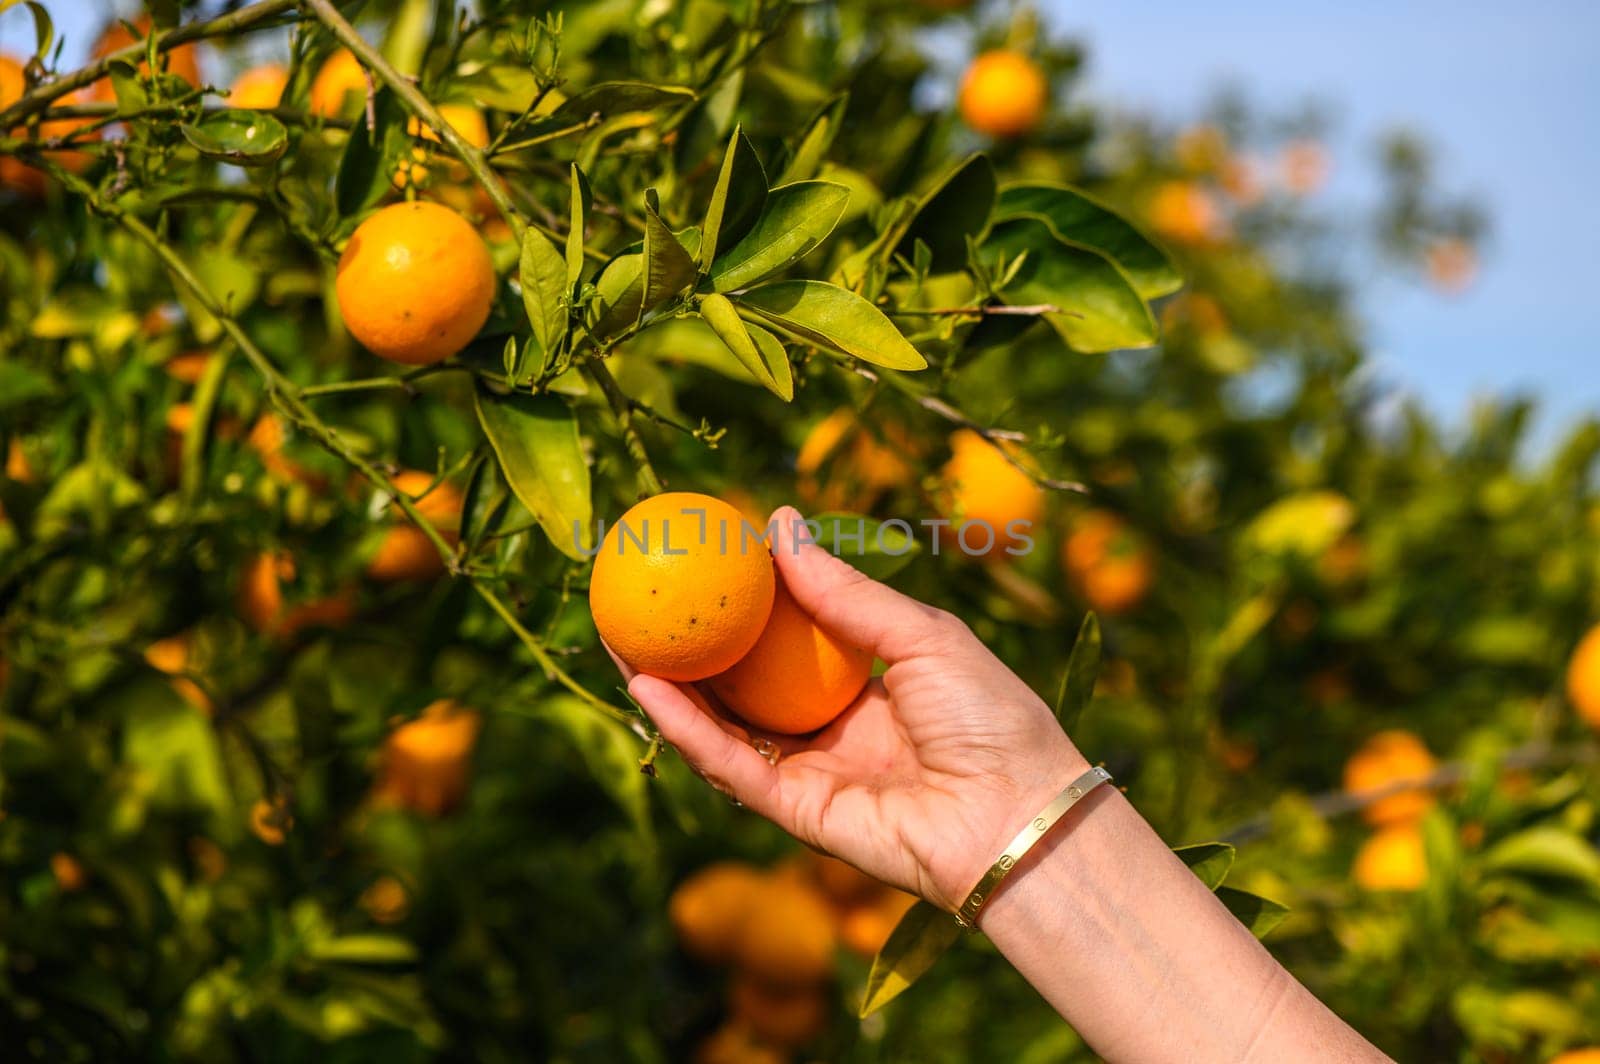 Women's hands pick juicy tasty oranges from a tree in the garden, harvesting on a sunny day 2